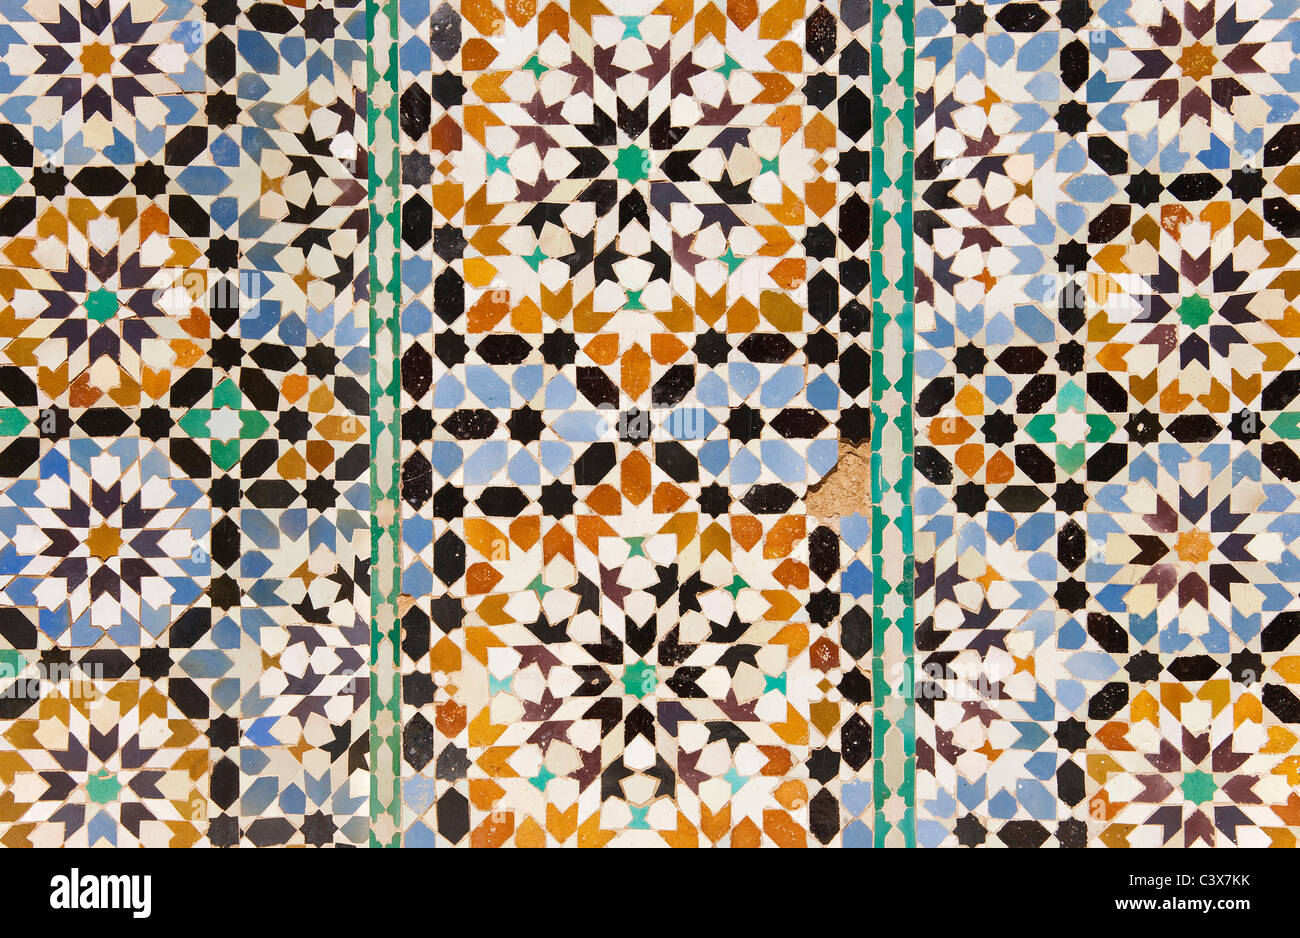 Highly artistic tile works in the central courtyard of the Ben Youssef Medersa, Marrakesh, Morocco. Stock Photo